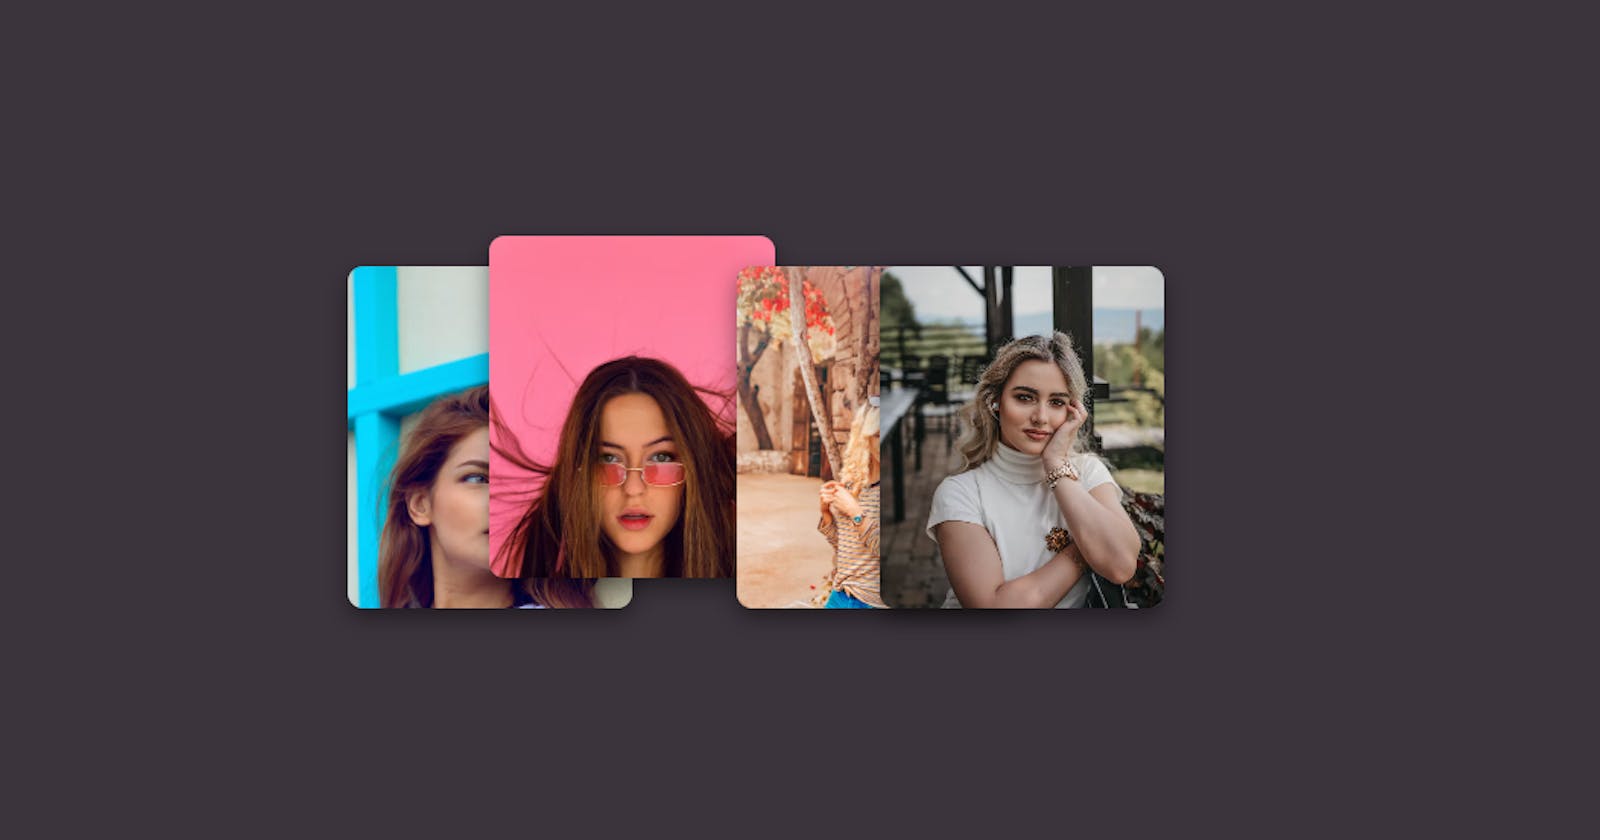 Image gallery with smooth hover effect in CSS